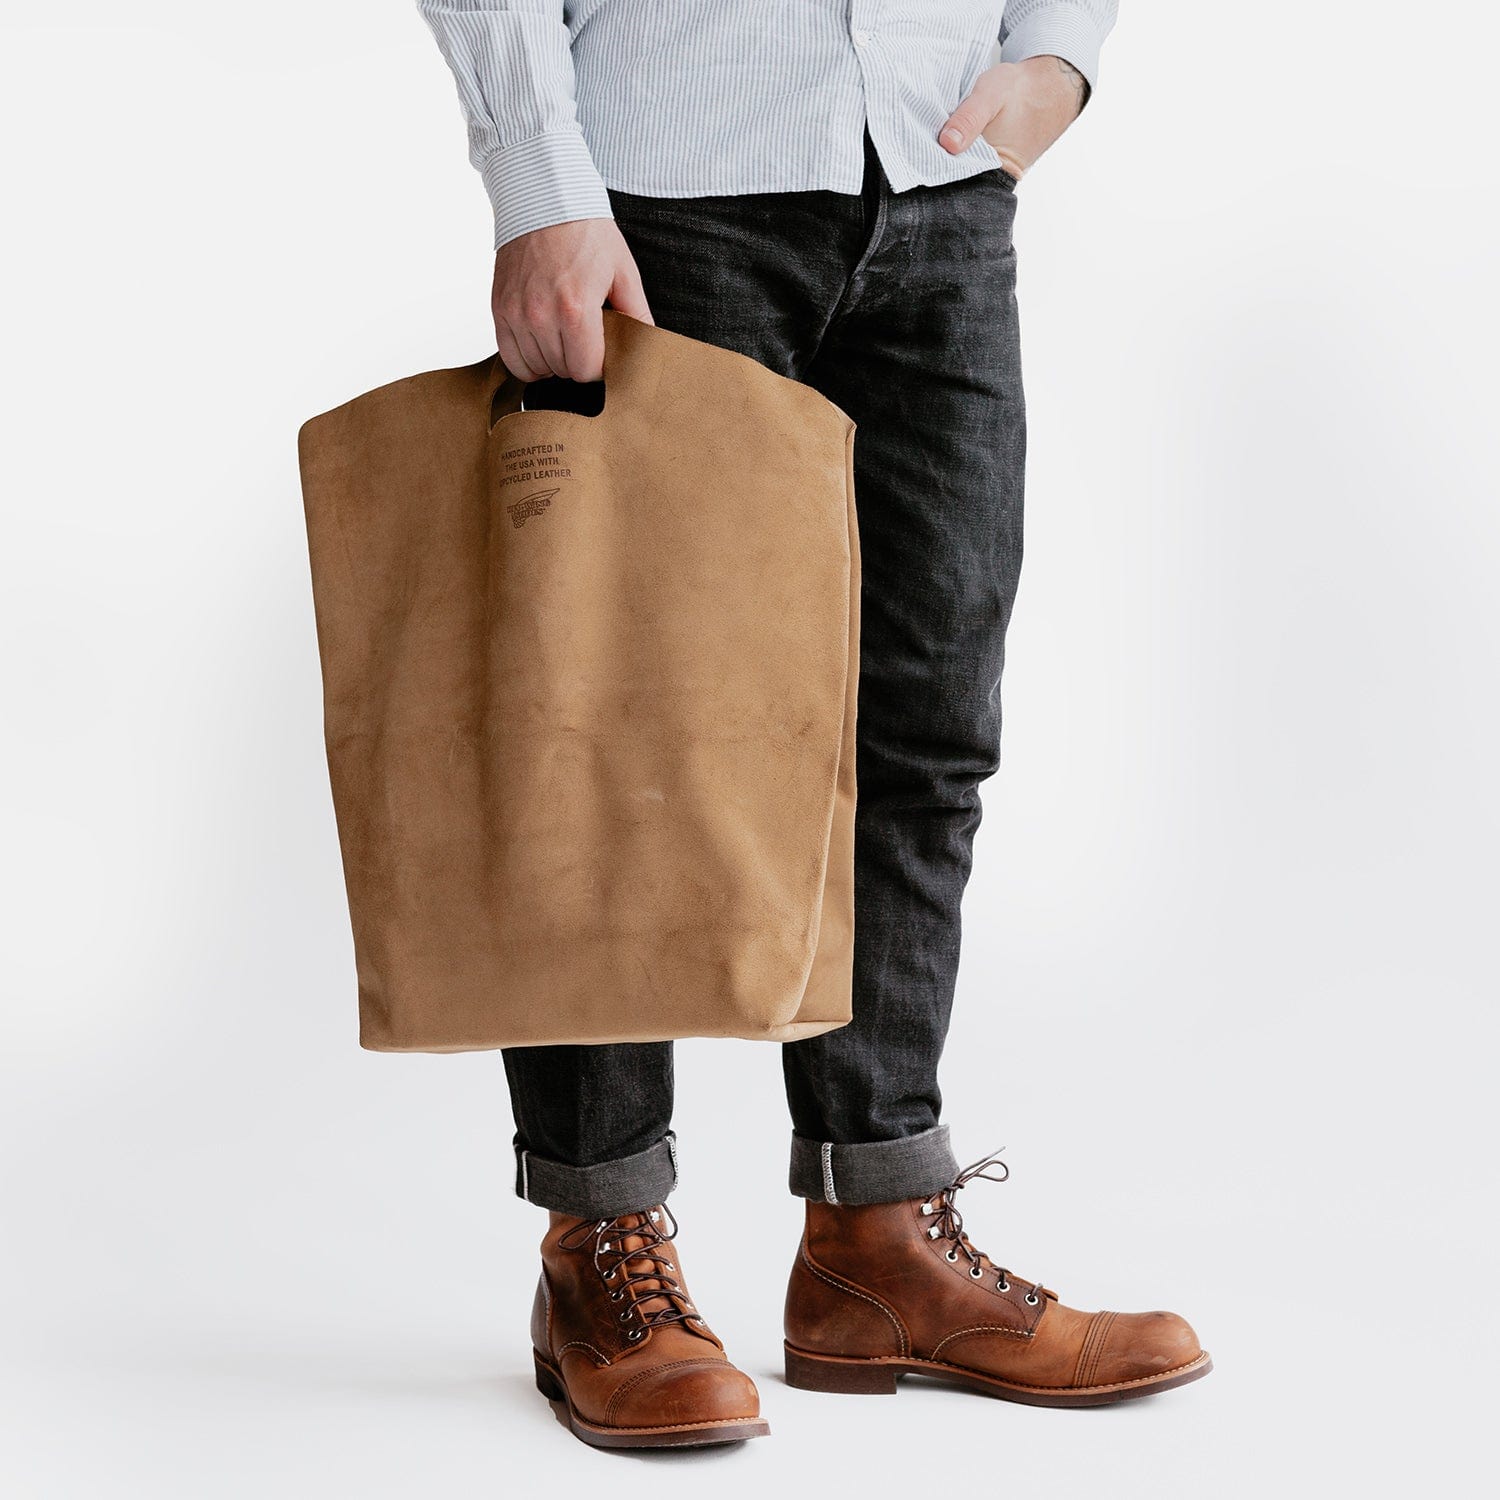 Red Wing Logo Tote Bag - Natural – Red Wing